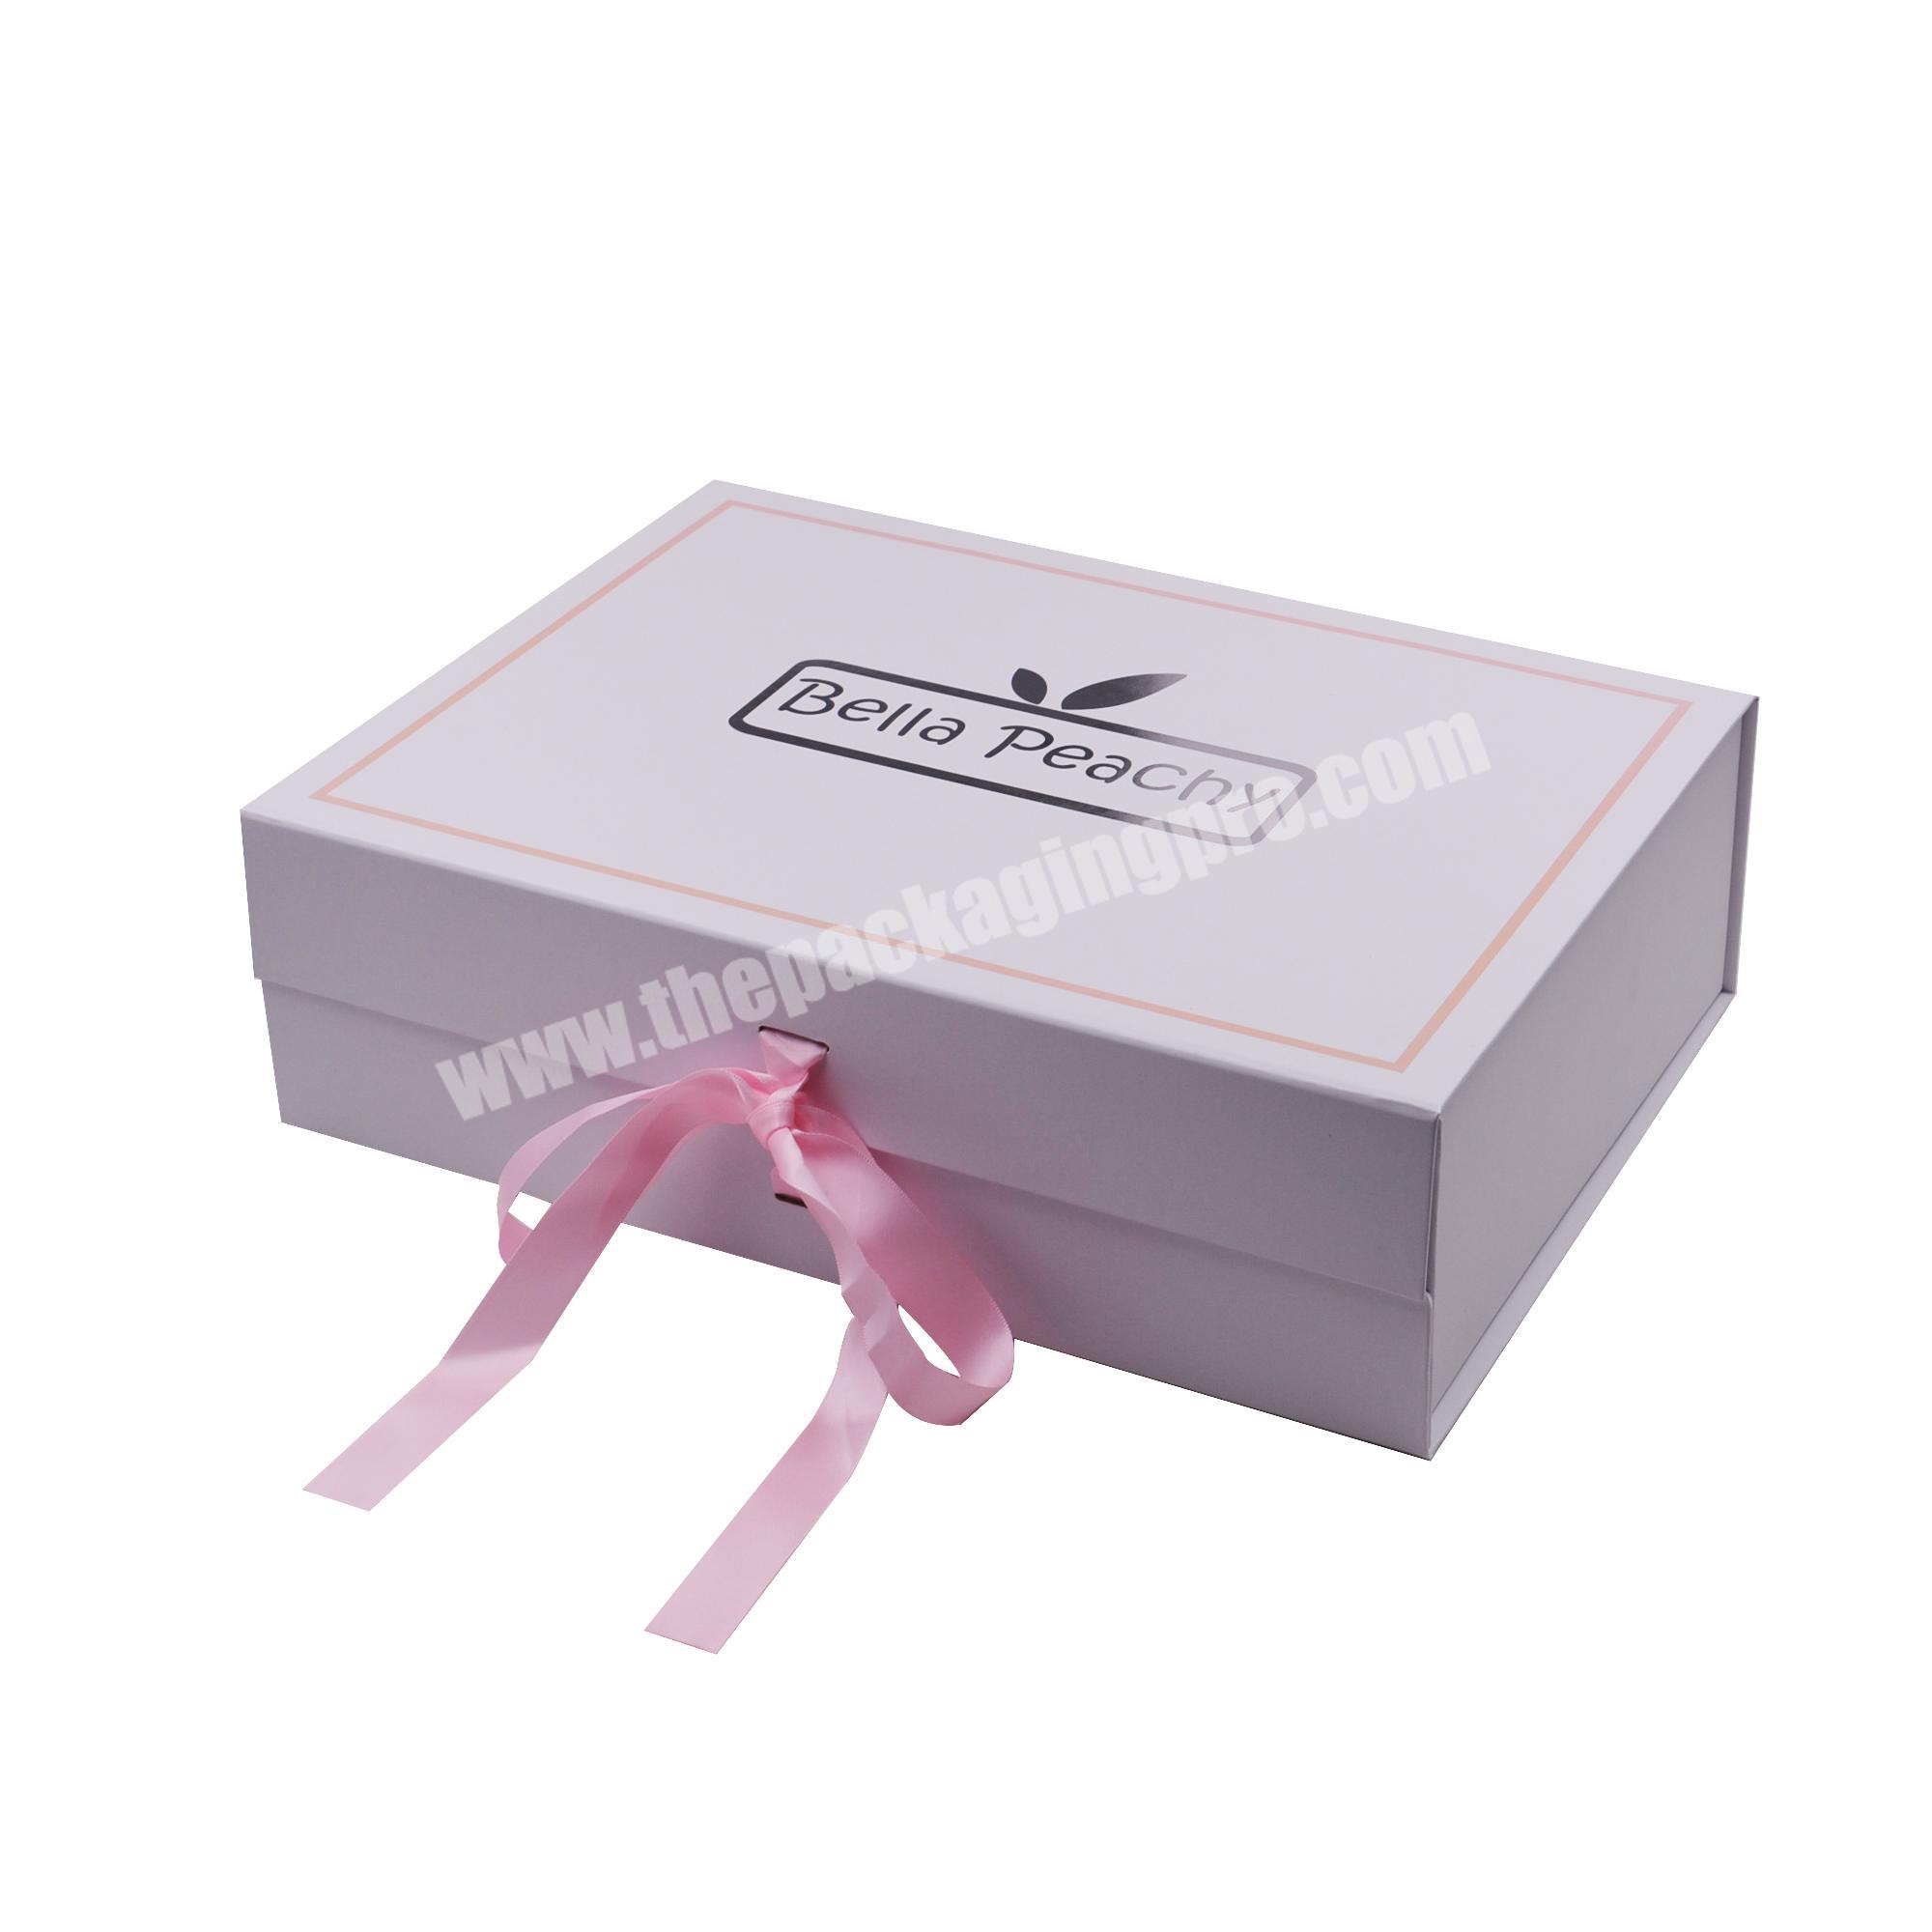 Wholesale Exquisite High Quality Best Price Magnetic Buckle  Box with Your Own Logo  for Essential Oil Wig Hair Extension